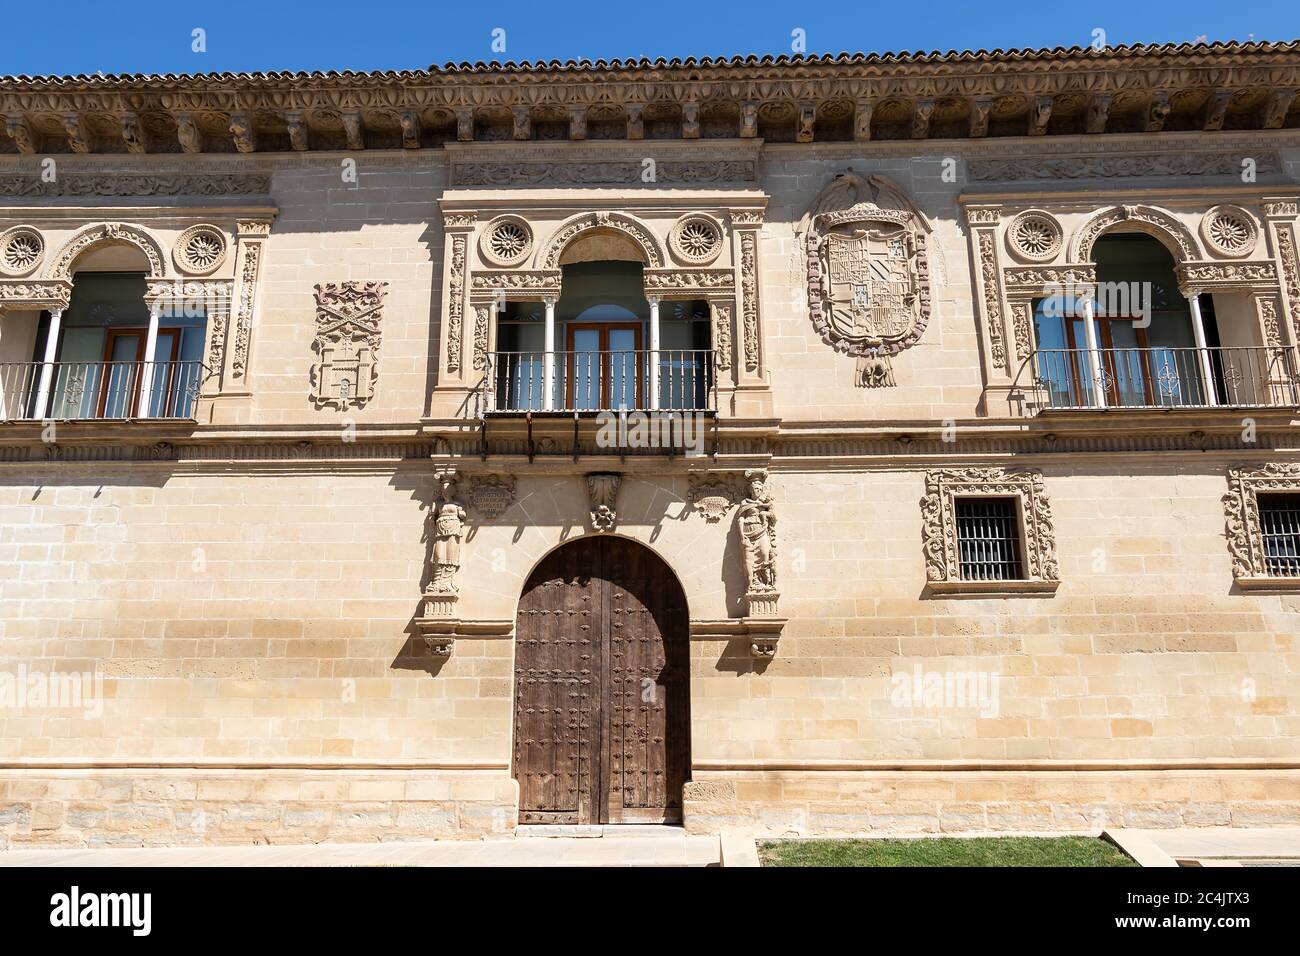 Town hall of Baeza. Renaissance city in the province of Jaén. World heritage site. Andalusia, Spain Stock Photo